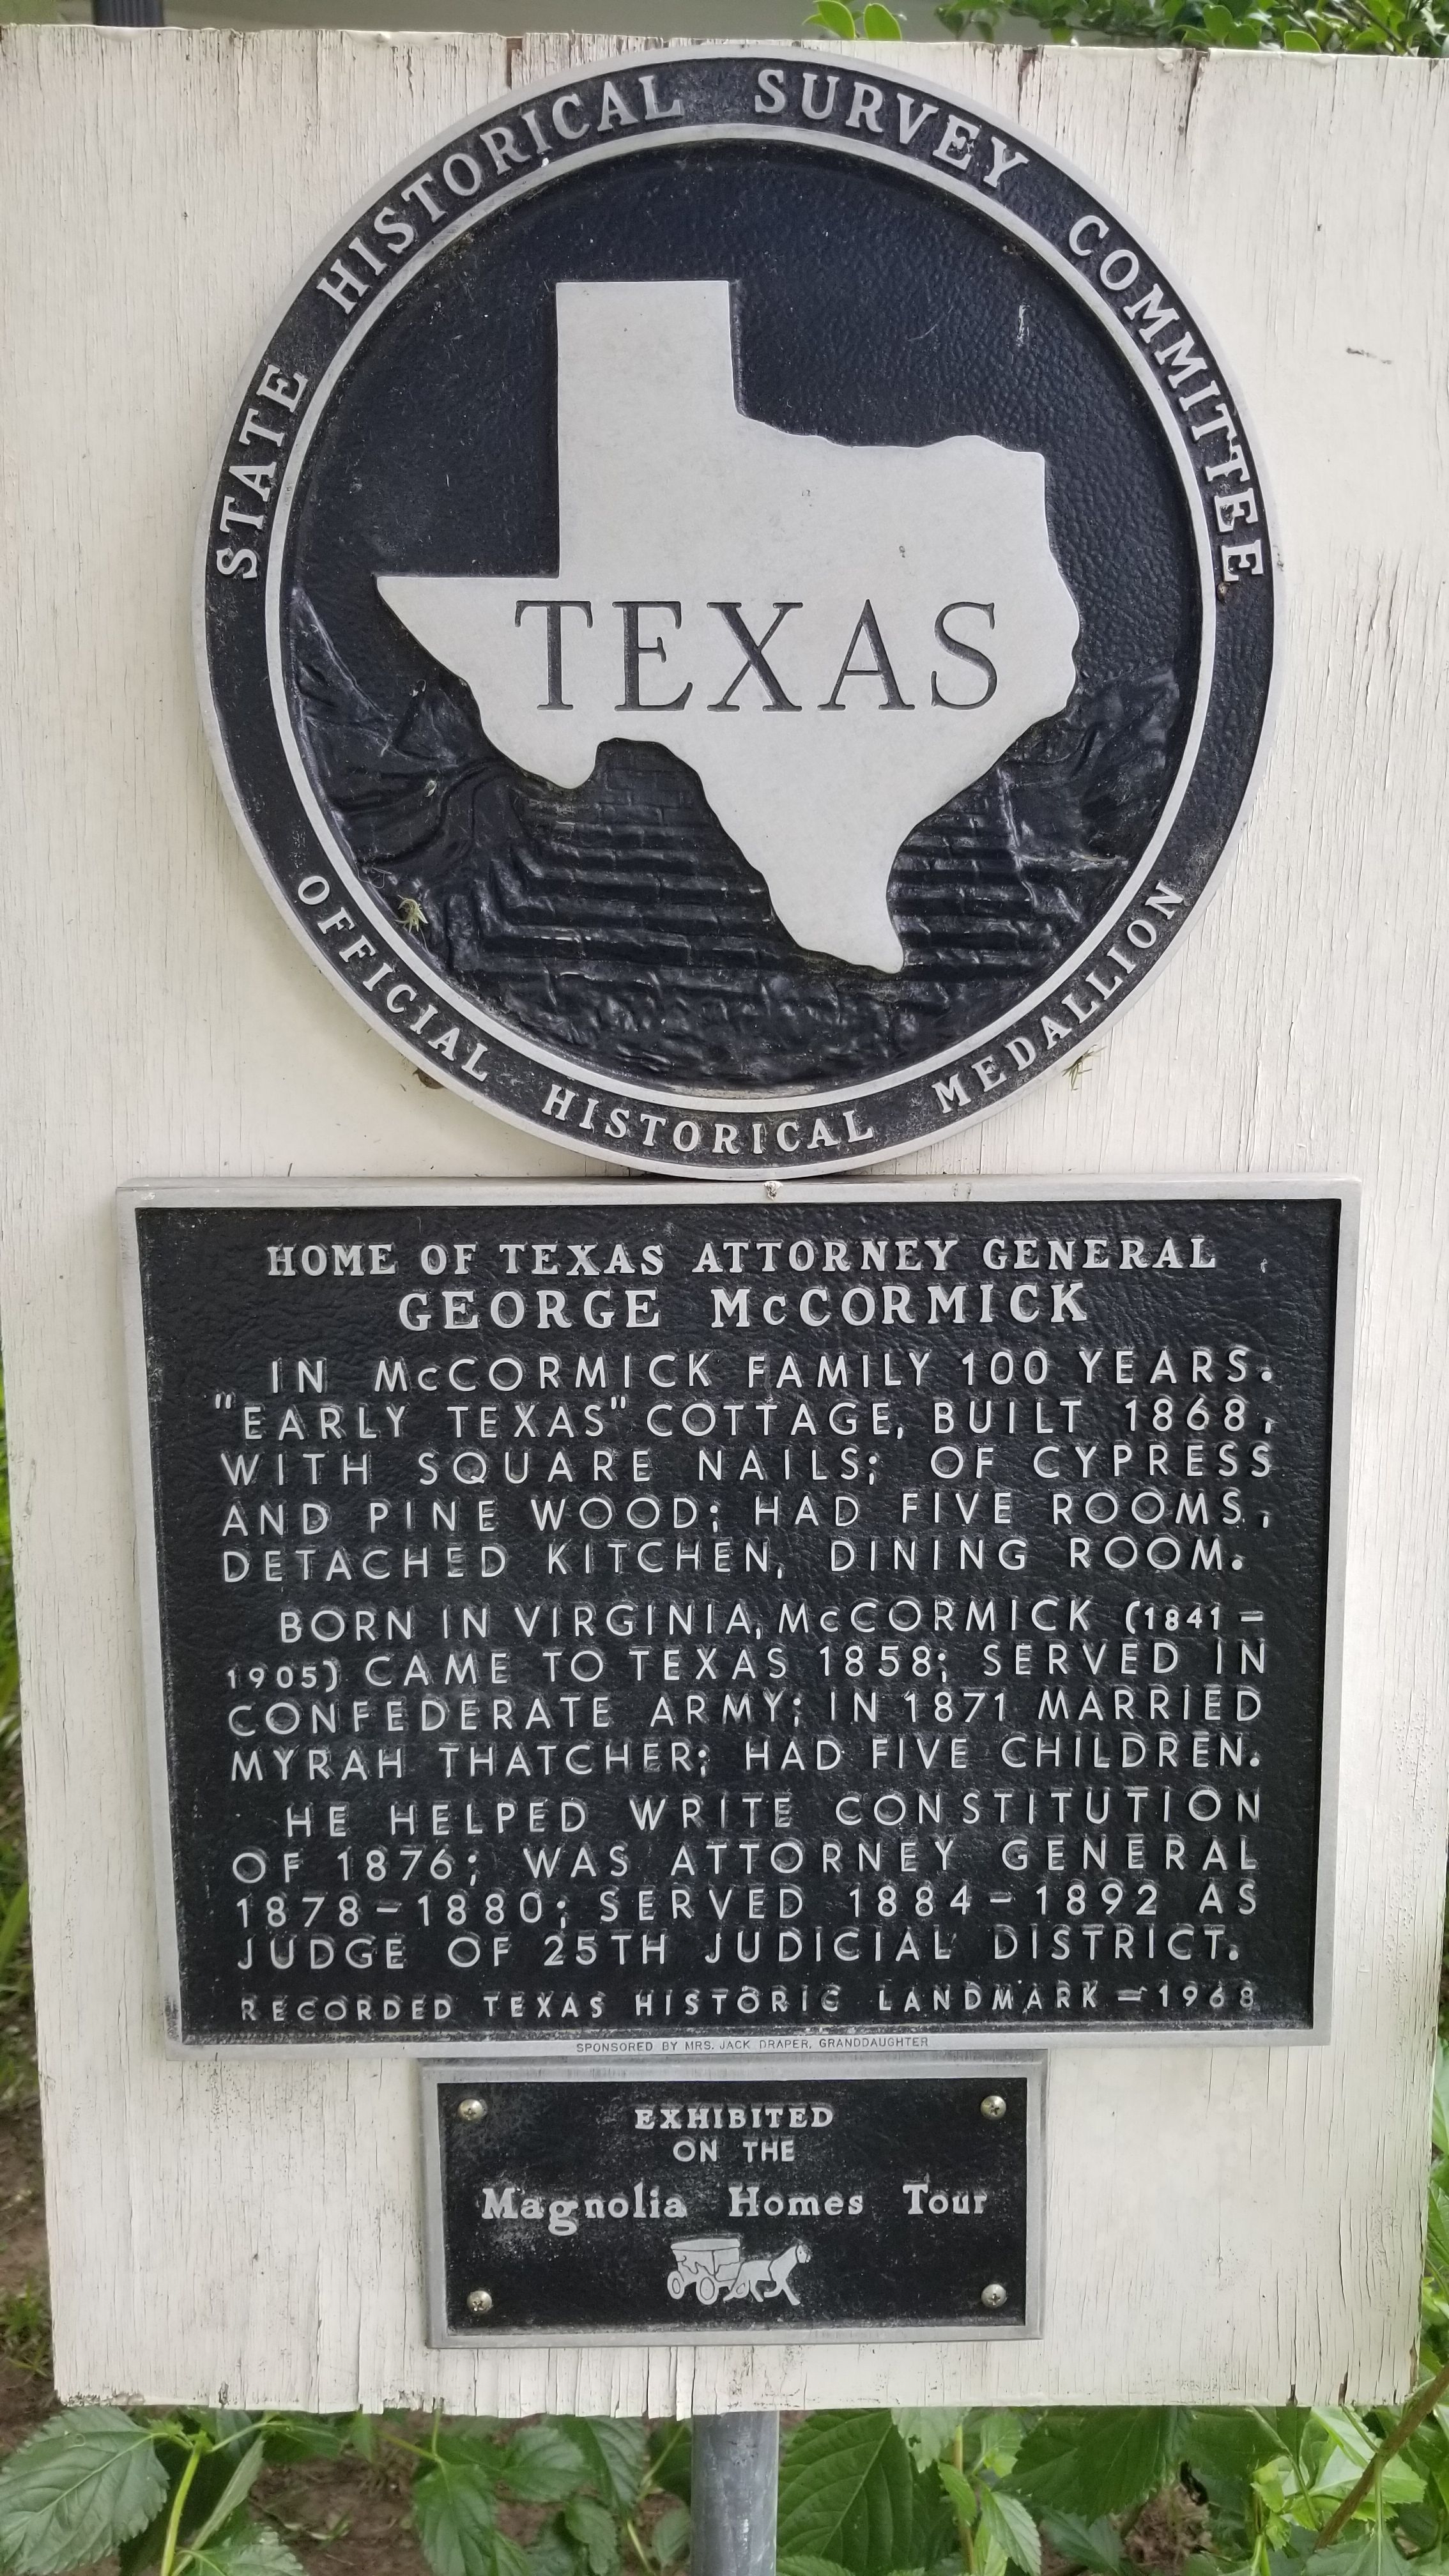 Home of Texas Attorney General George McCormick Marker